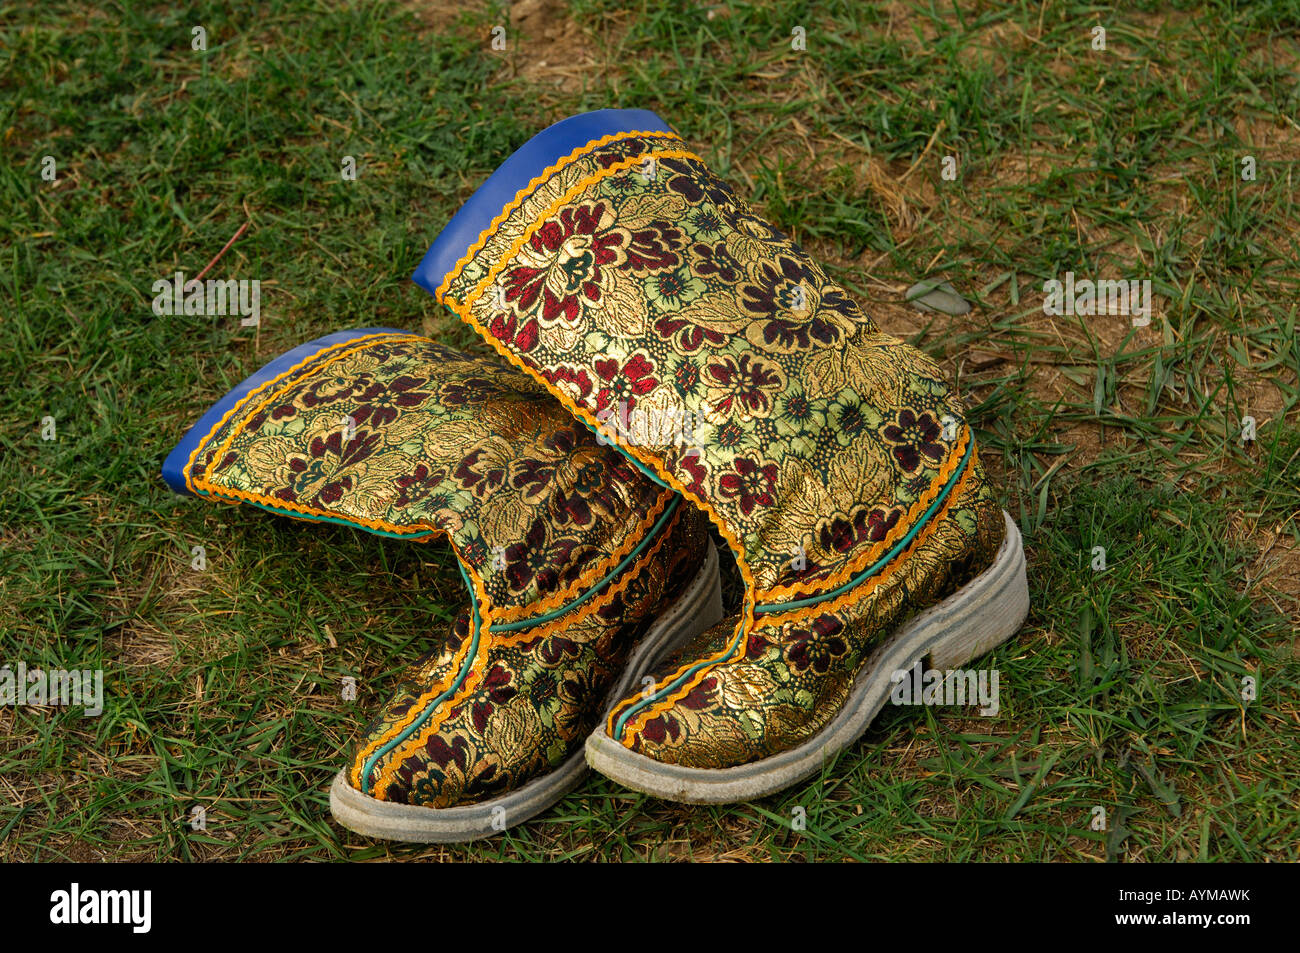 Decorated boots in the grass Ulaanbaatar Mongolia Stock Photo